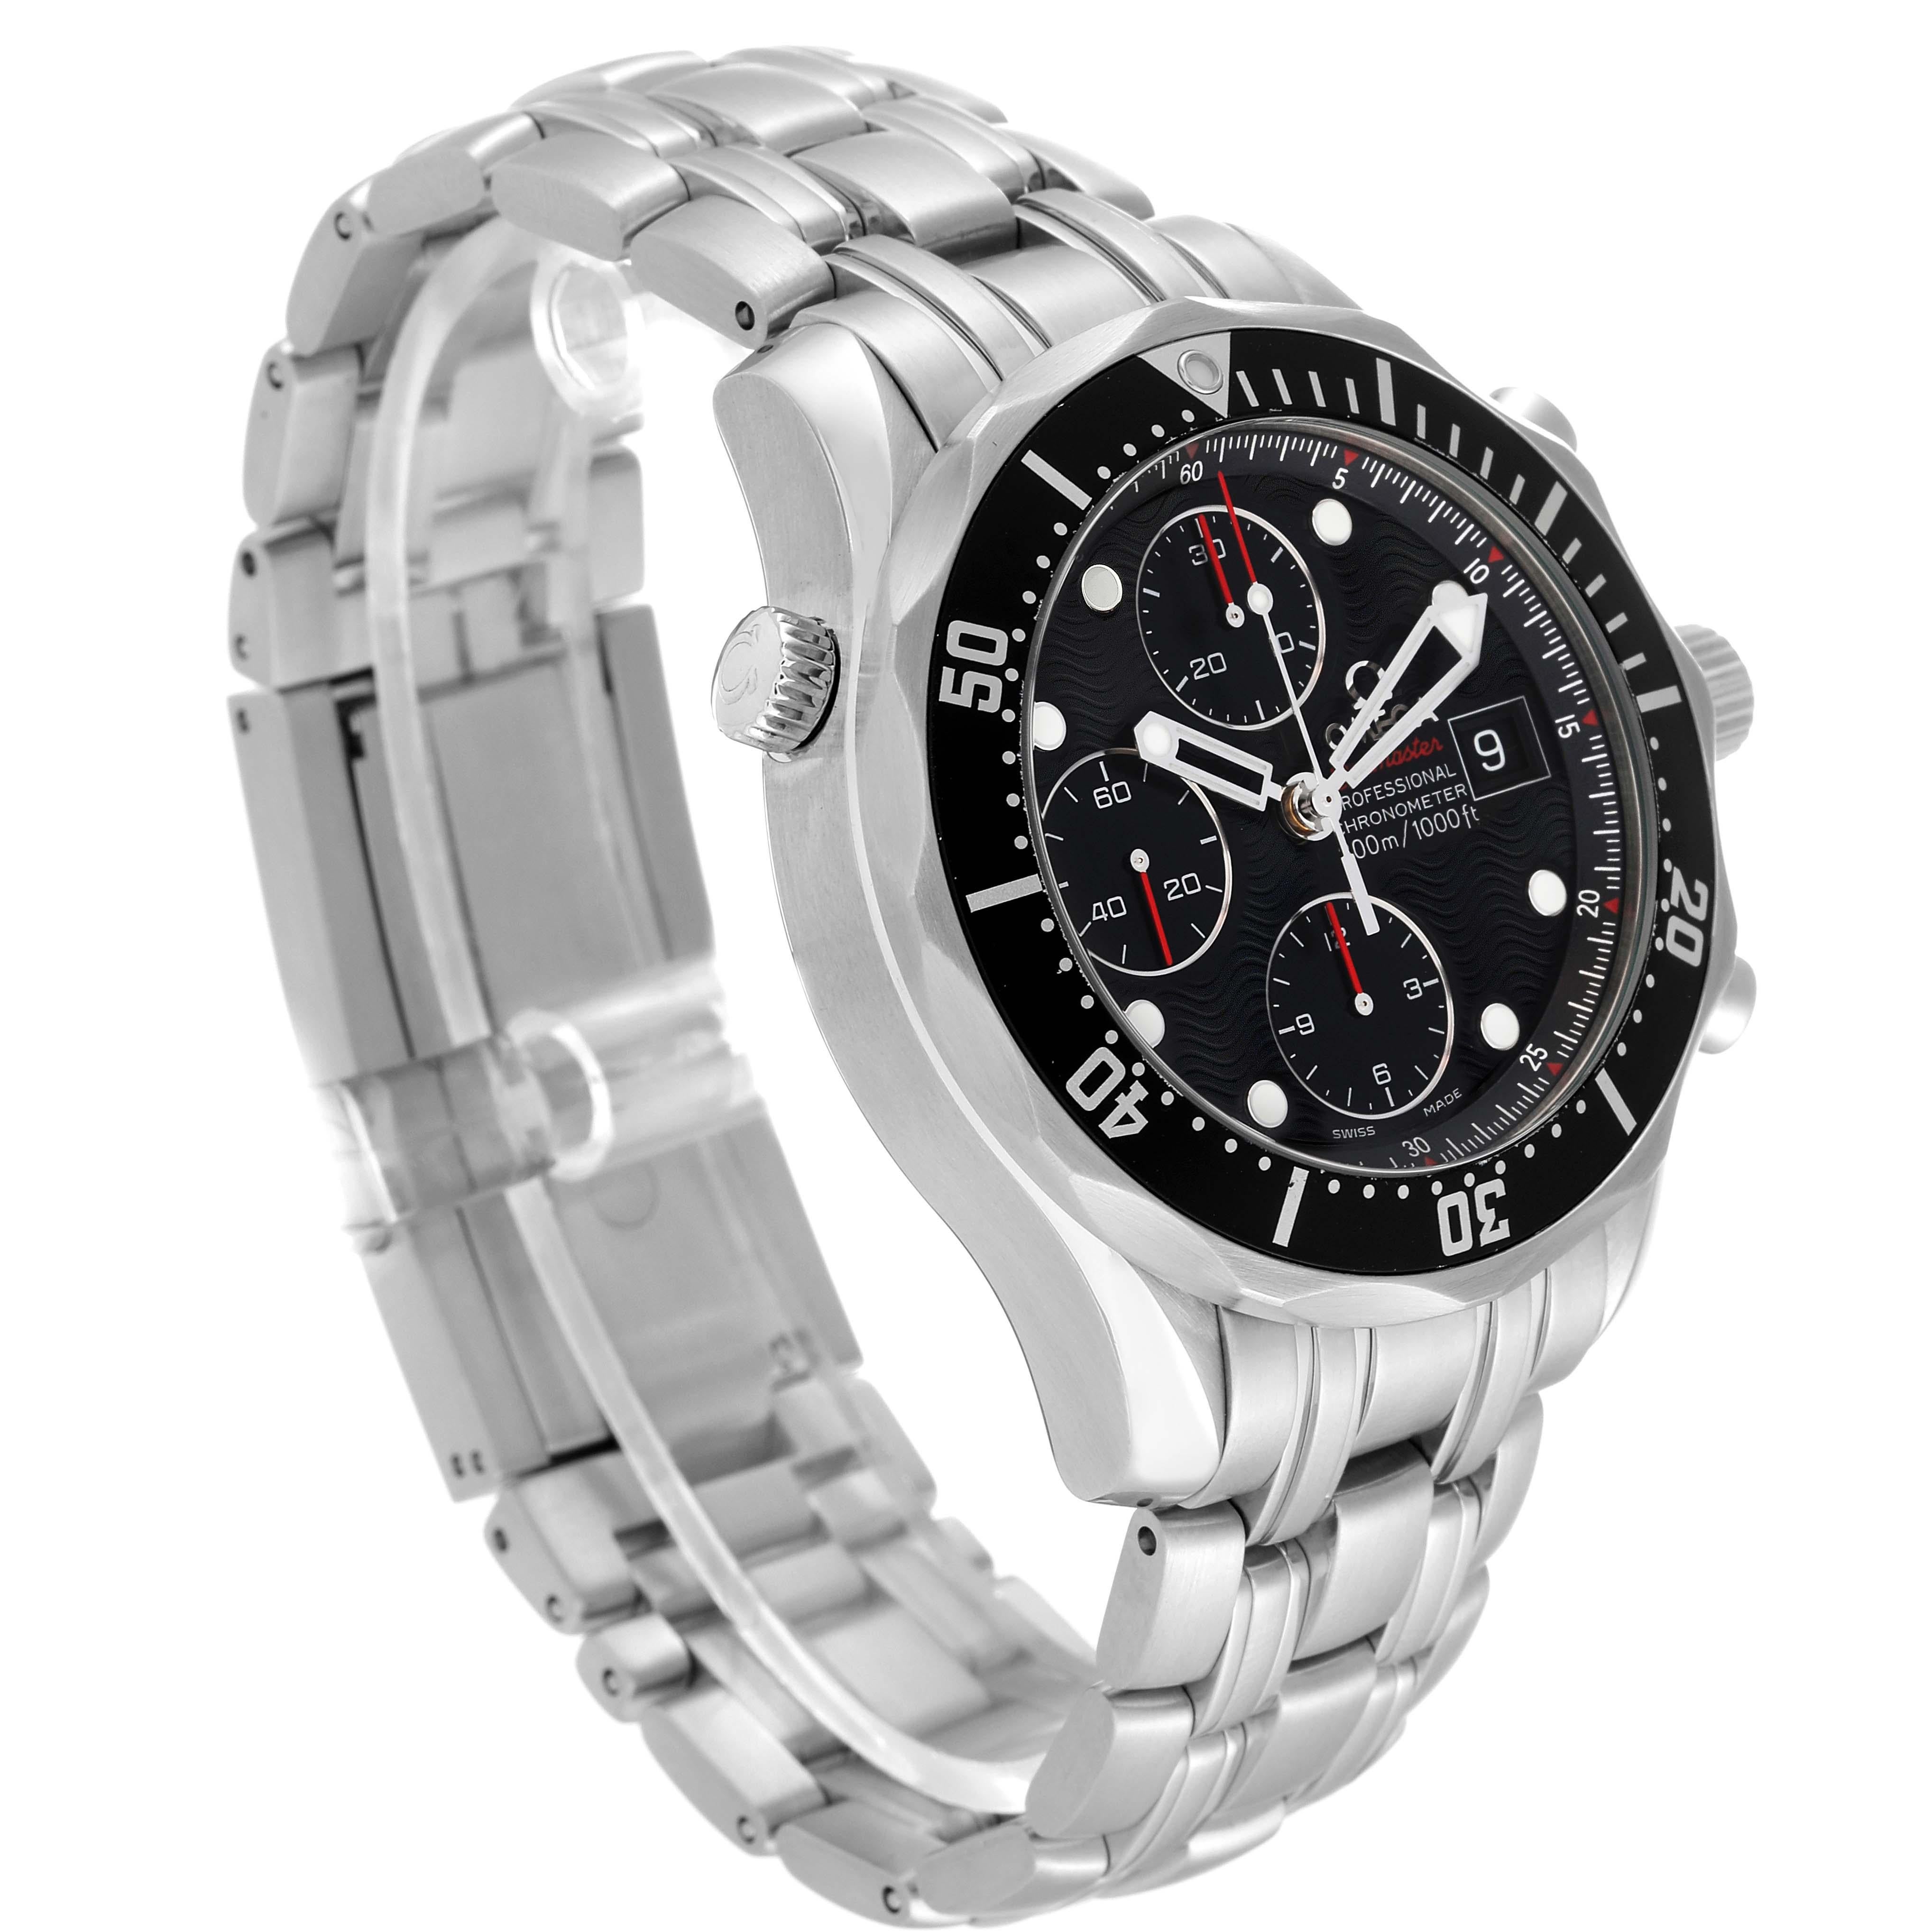 Omega Seamaster Chronograph Steel Mens Watch 213.30.42.40.01.001 Box Card For Sale 6